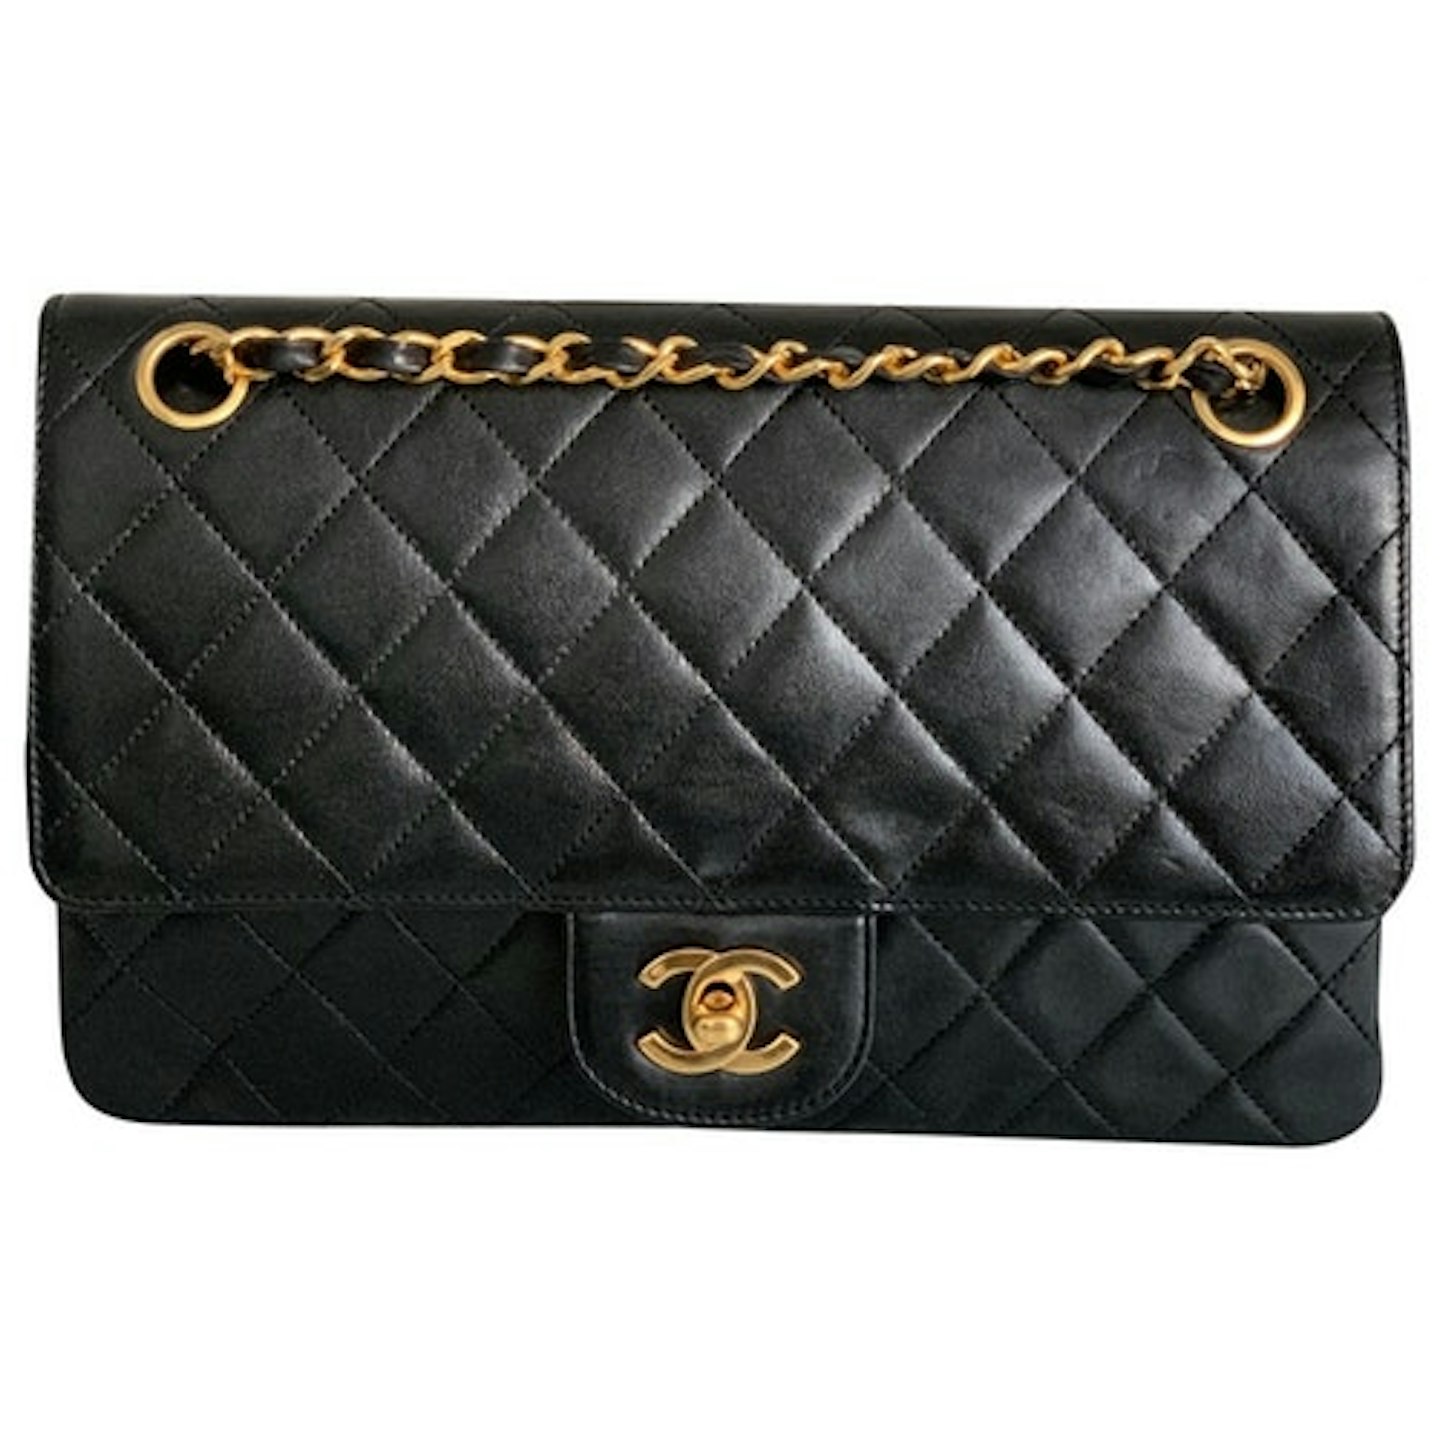 Which Chanel Bag Makes The Best Investment?